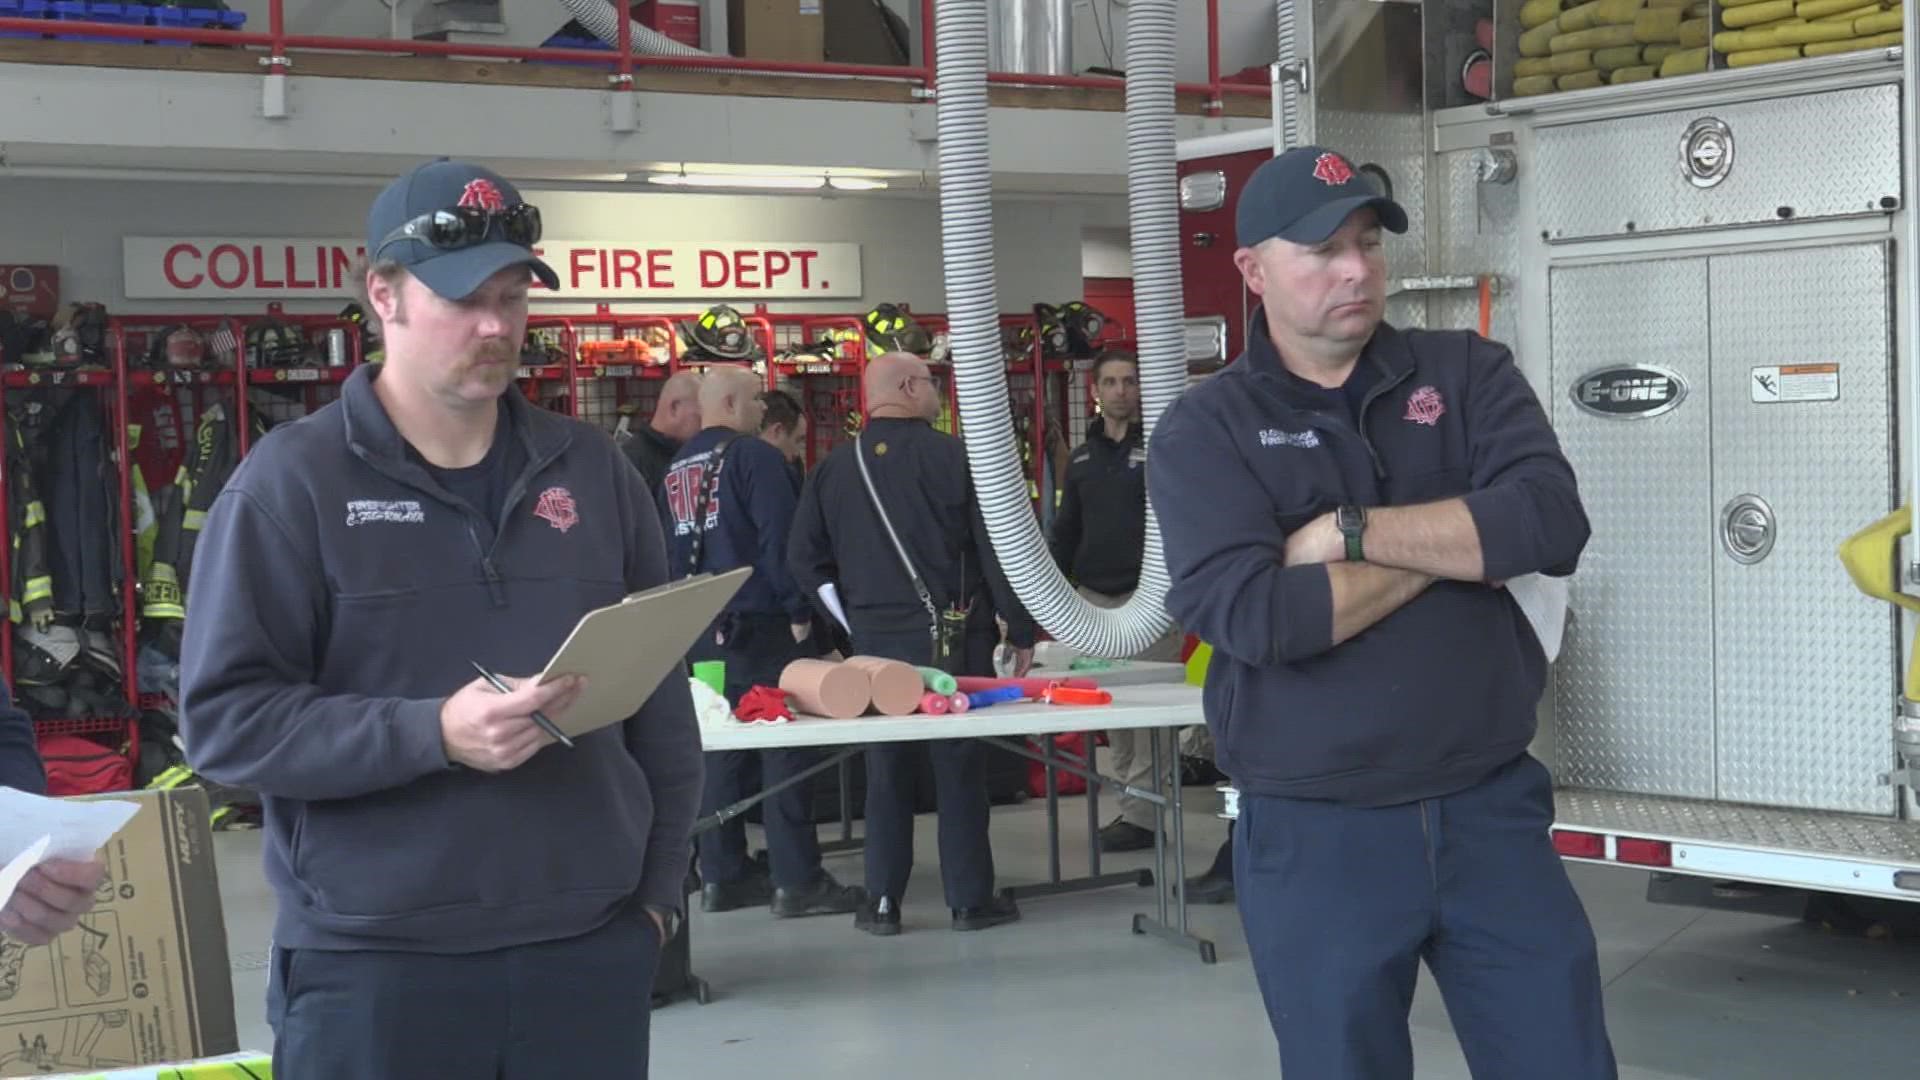 In light of recent school shootings across the country and in St. Louis, the Collinsville Fire Department hosted a mass casualty response training starting Monday.